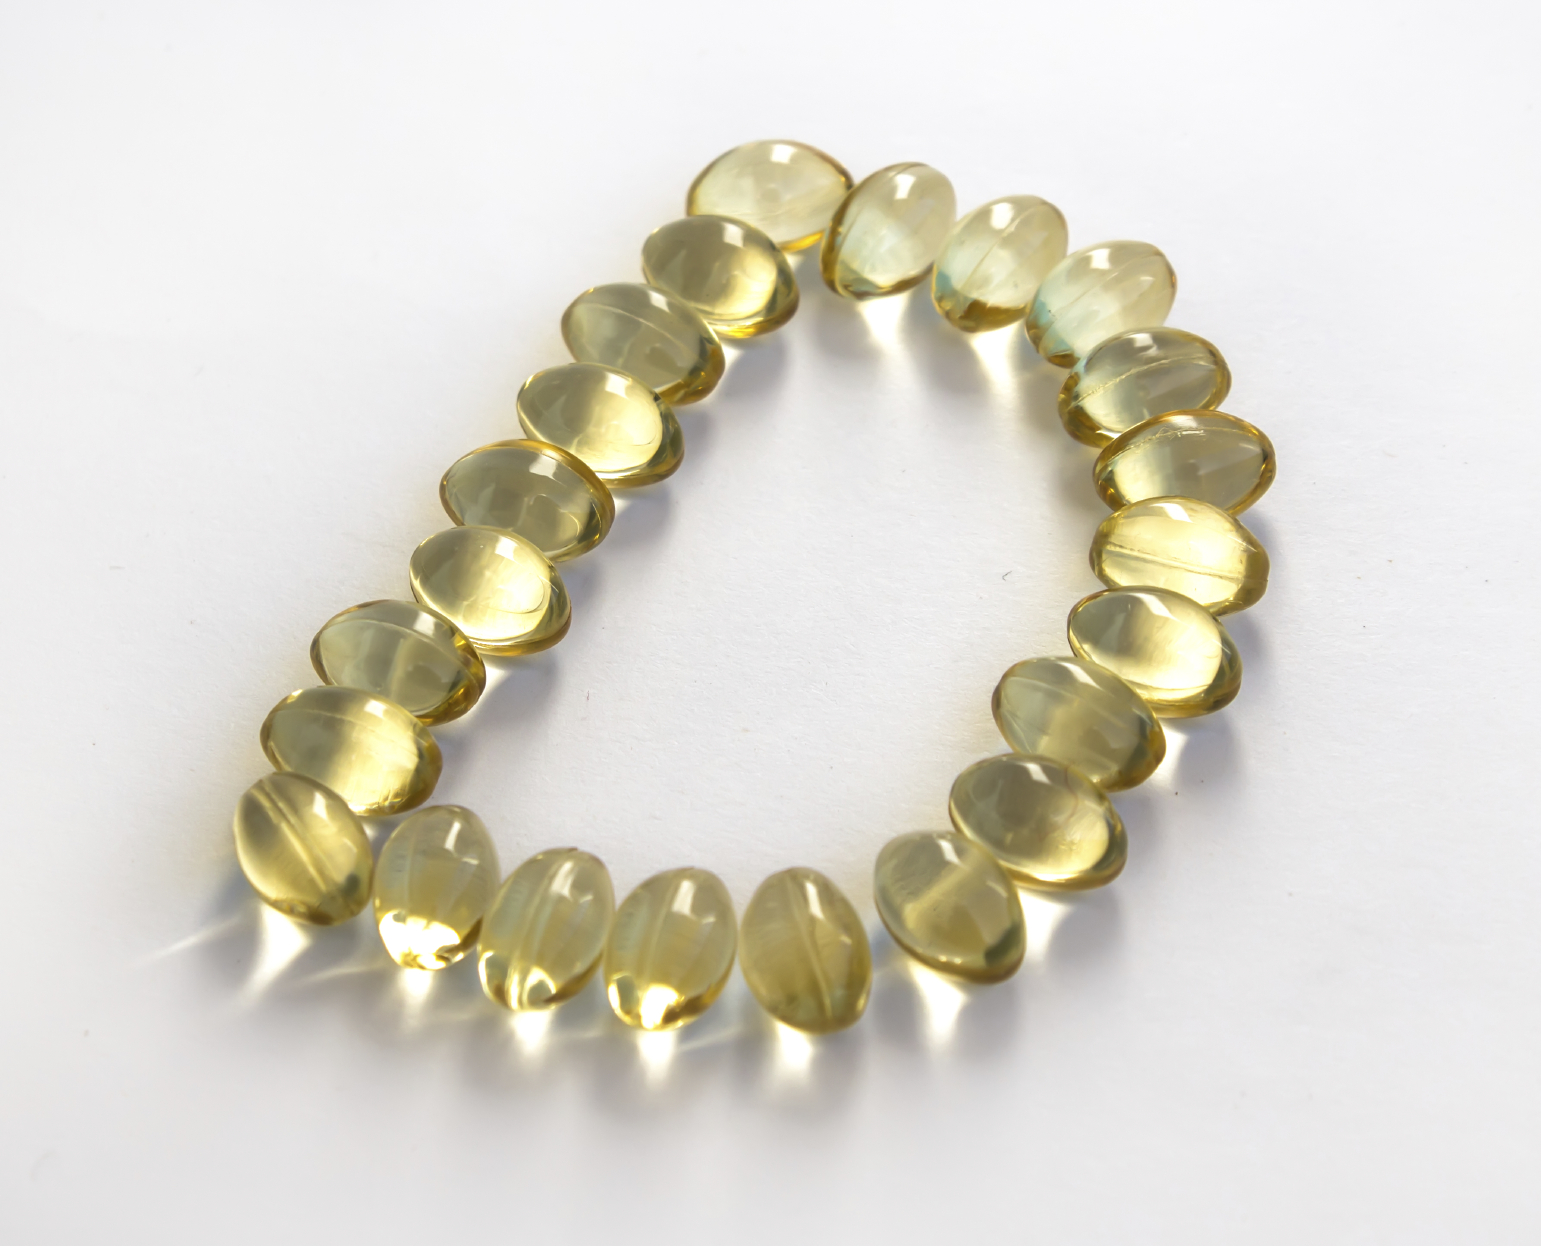 A vitamin D deficiency could put your bone and brain health on the line. But having levels lower than this may also put you at 35% greater risk for a heart event…